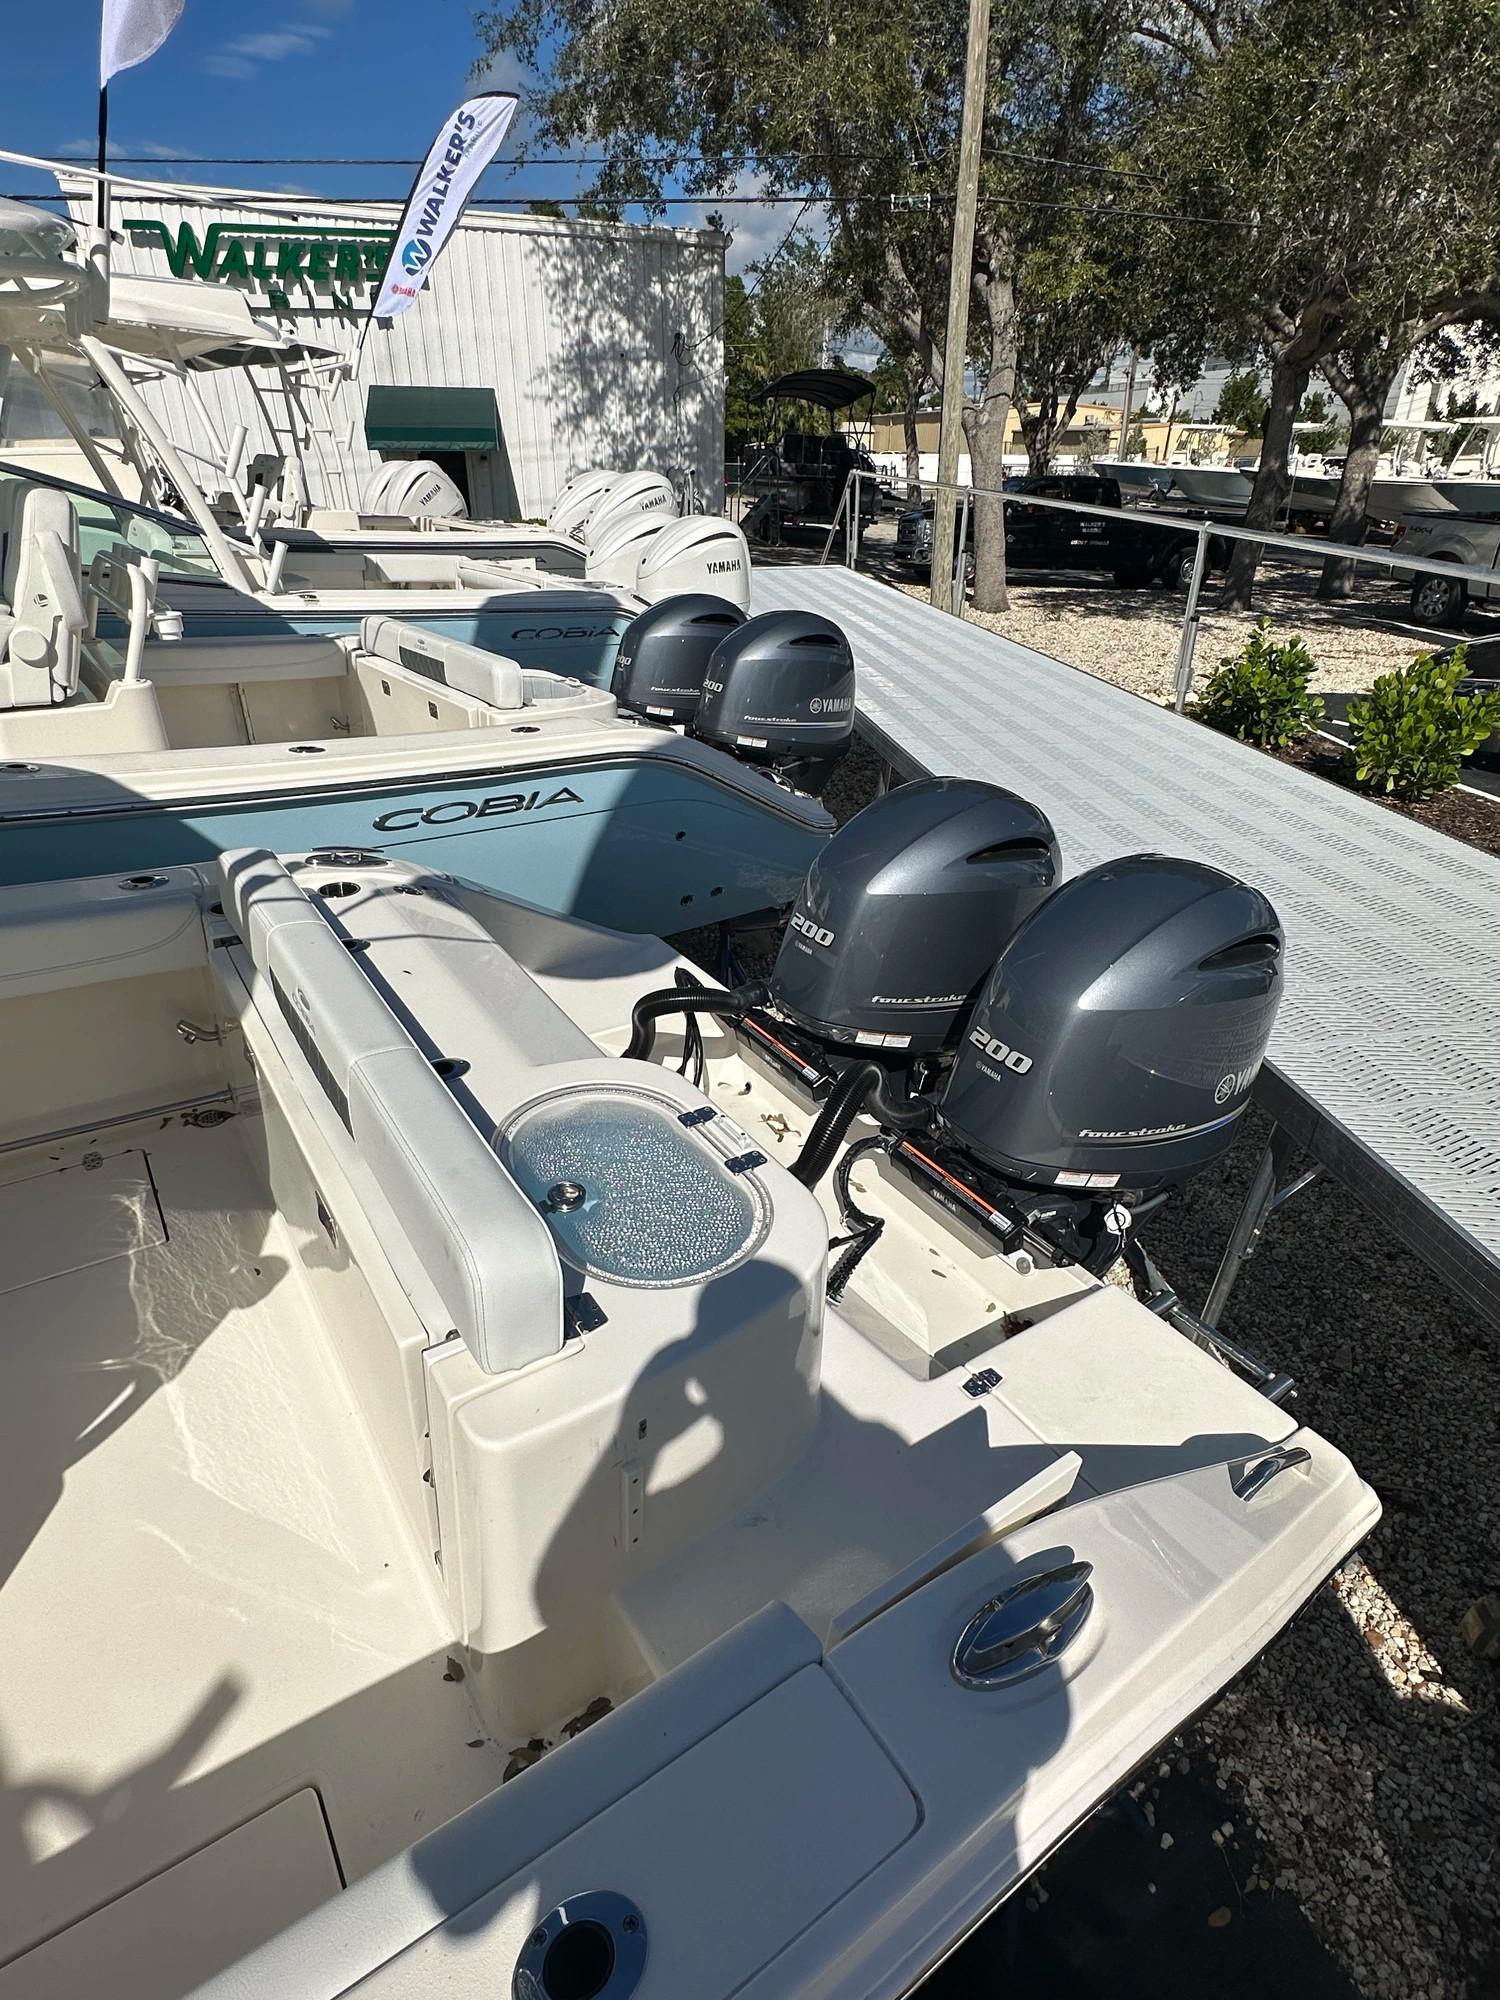 Frp Center Console Fishing Boat With Outboard at Best Price in